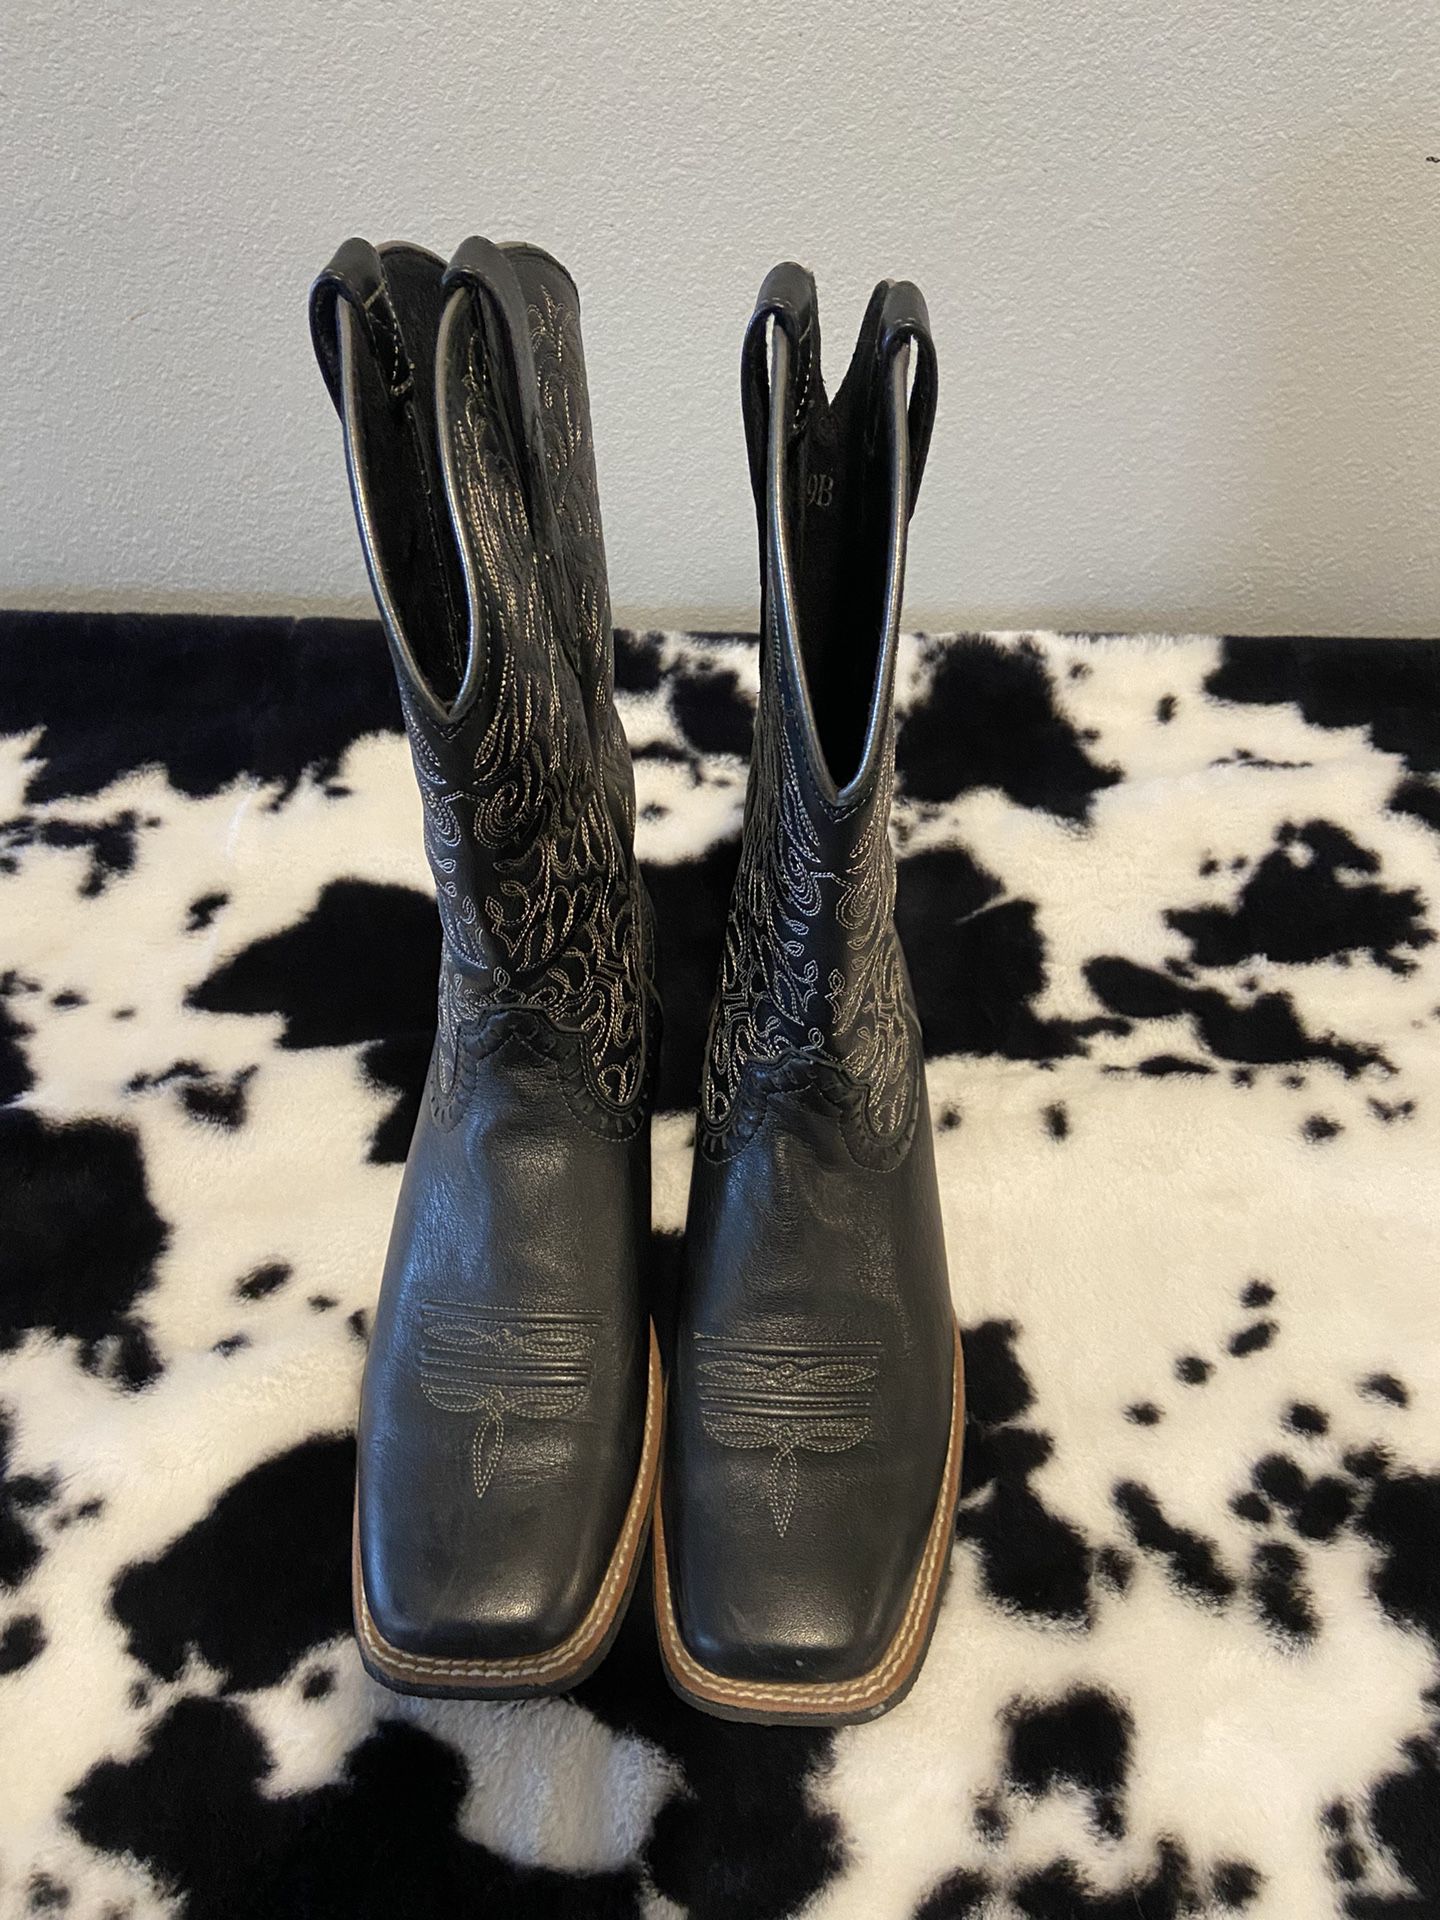 Women’s Ariat Square Toe Boots 